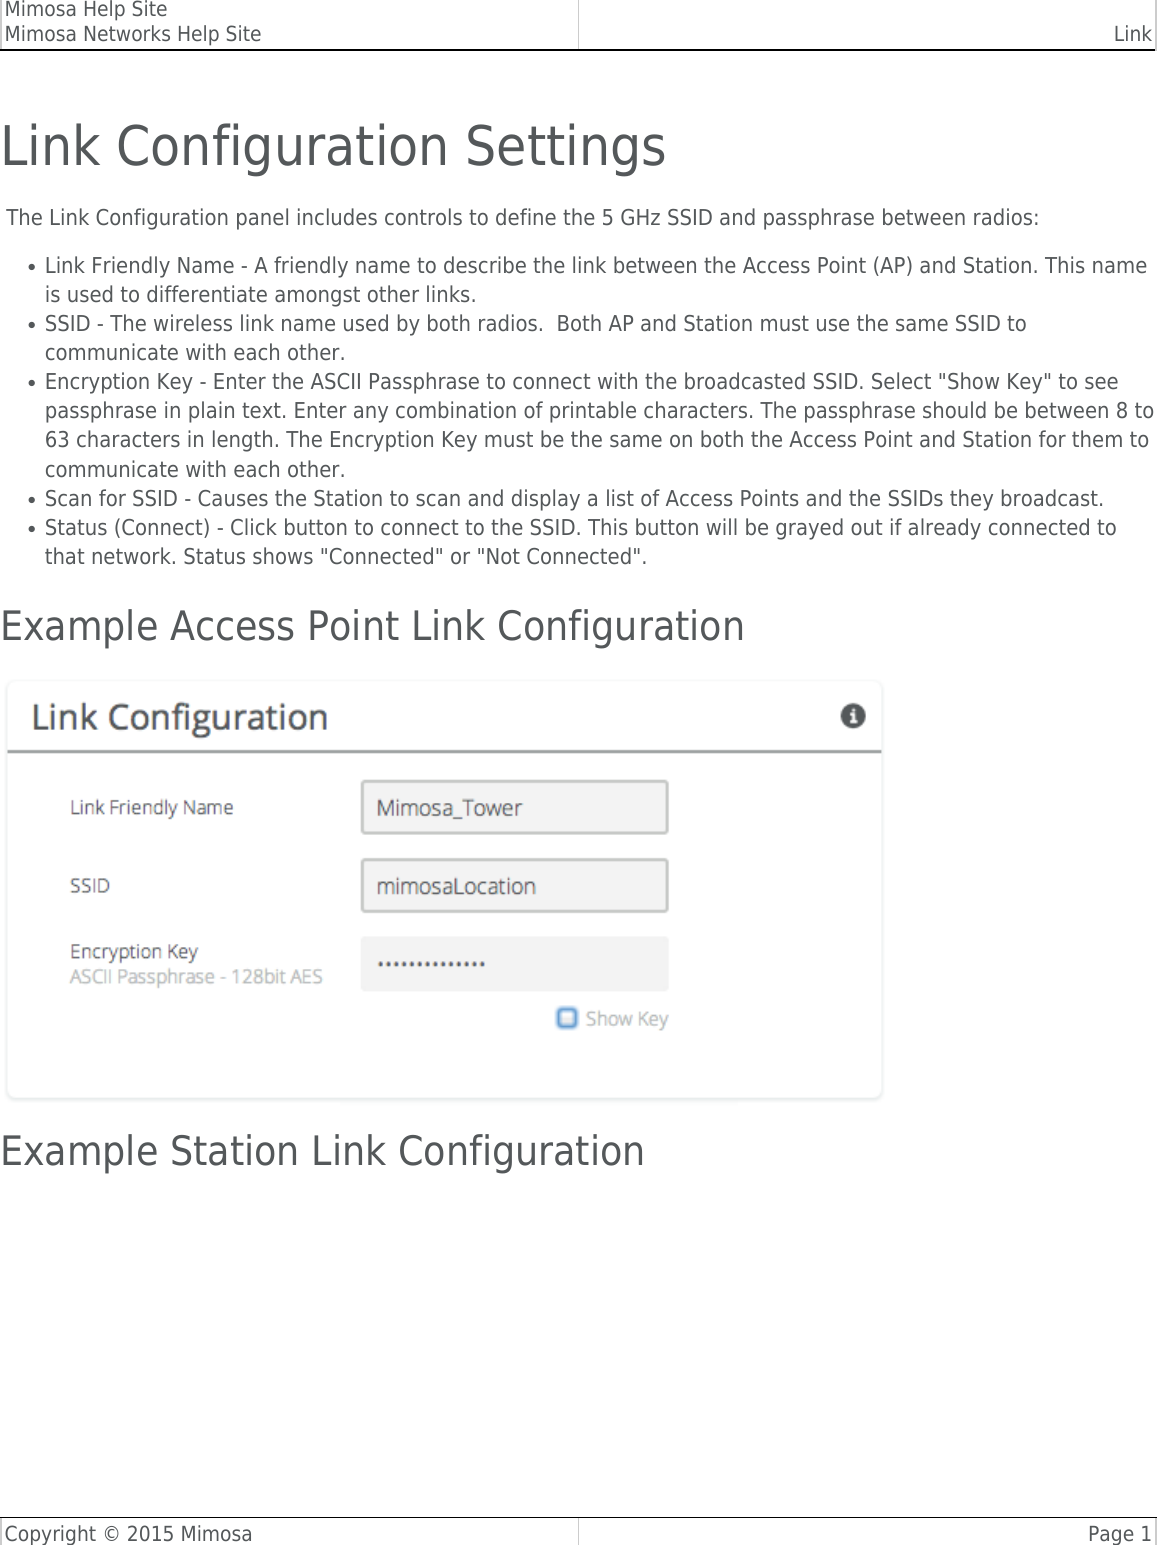 Mimosa Help SiteMimosa Networks Help Site LinkCopyright © 2015 Mimosa Page 1Link Configuration Settings The Link Configuration panel includes controls to define the 5 GHz SSID and passphrase between radios:Link Friendly Name - A friendly name to describe the link between the Access Point (AP) and Station. This name●is used to differentiate amongst other links.SSID - The wireless link name used by both radios.  Both AP and Station must use the same SSID to●communicate with each other.Encryption Key - Enter the ASCII Passphrase to connect with the broadcasted SSID. Select &quot;Show Key&quot; to see●passphrase in plain text. Enter any combination of printable characters. The passphrase should be between 8 to63 characters in length. The Encryption Key must be the same on both the Access Point and Station for them tocommunicate with each other.Scan for SSID - Causes the Station to scan and display a list of Access Points and the SSIDs they broadcast.●Status (Connect) - Click button to connect to the SSID. This button will be grayed out if already connected to●that network. Status shows &quot;Connected&quot; or &quot;Not Connected&quot;.Example Access Point Link Configuration​Example Station Link Configuration